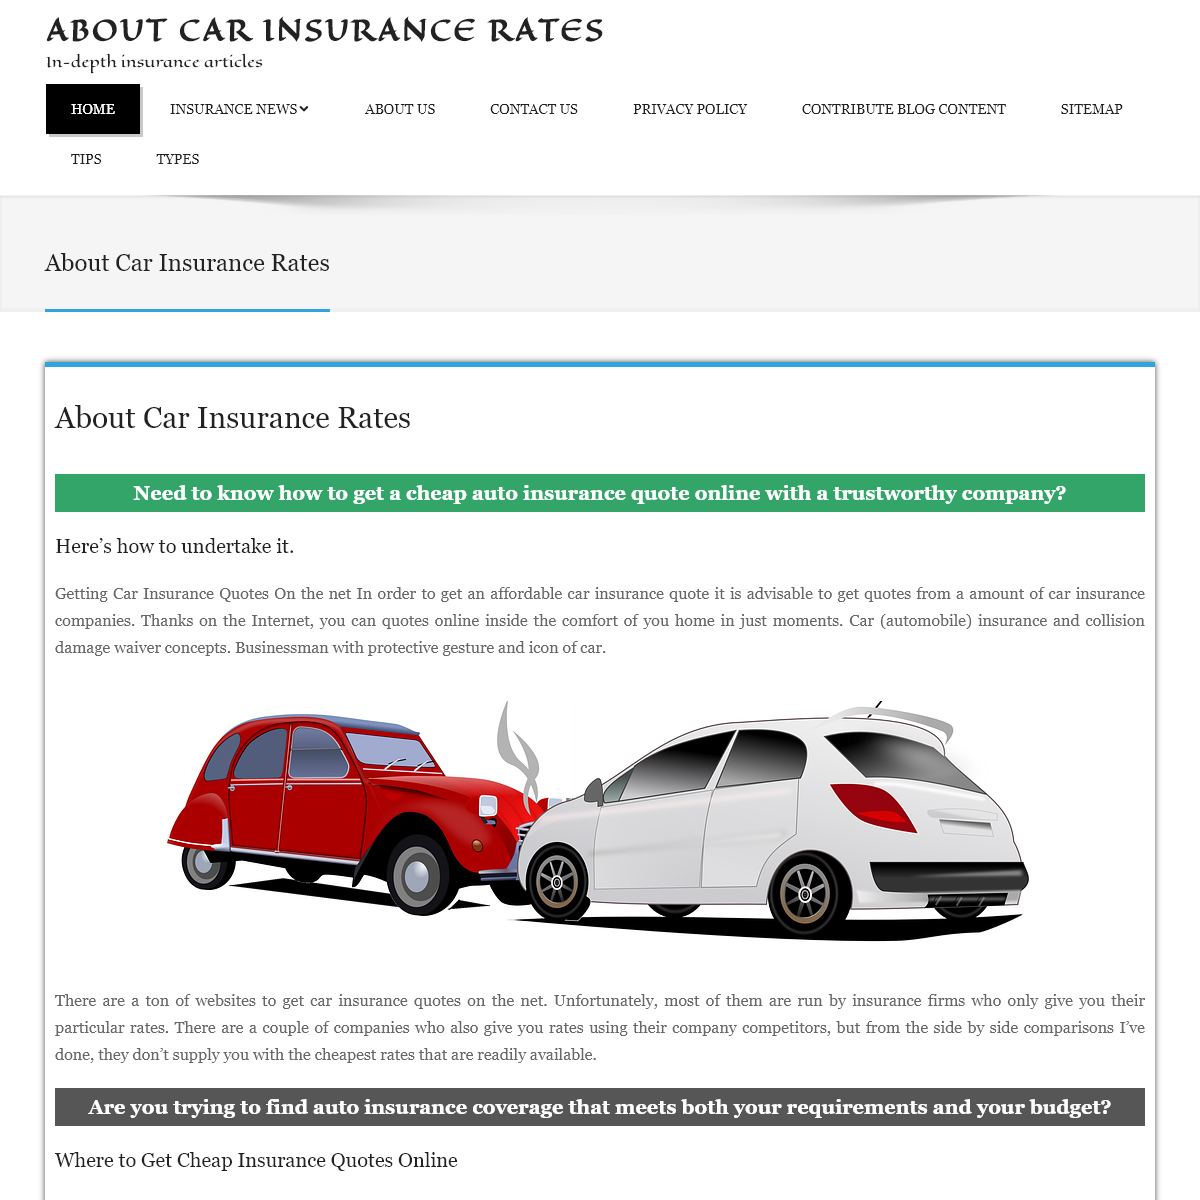 A complete backup of aboutcarinsurancerates.com